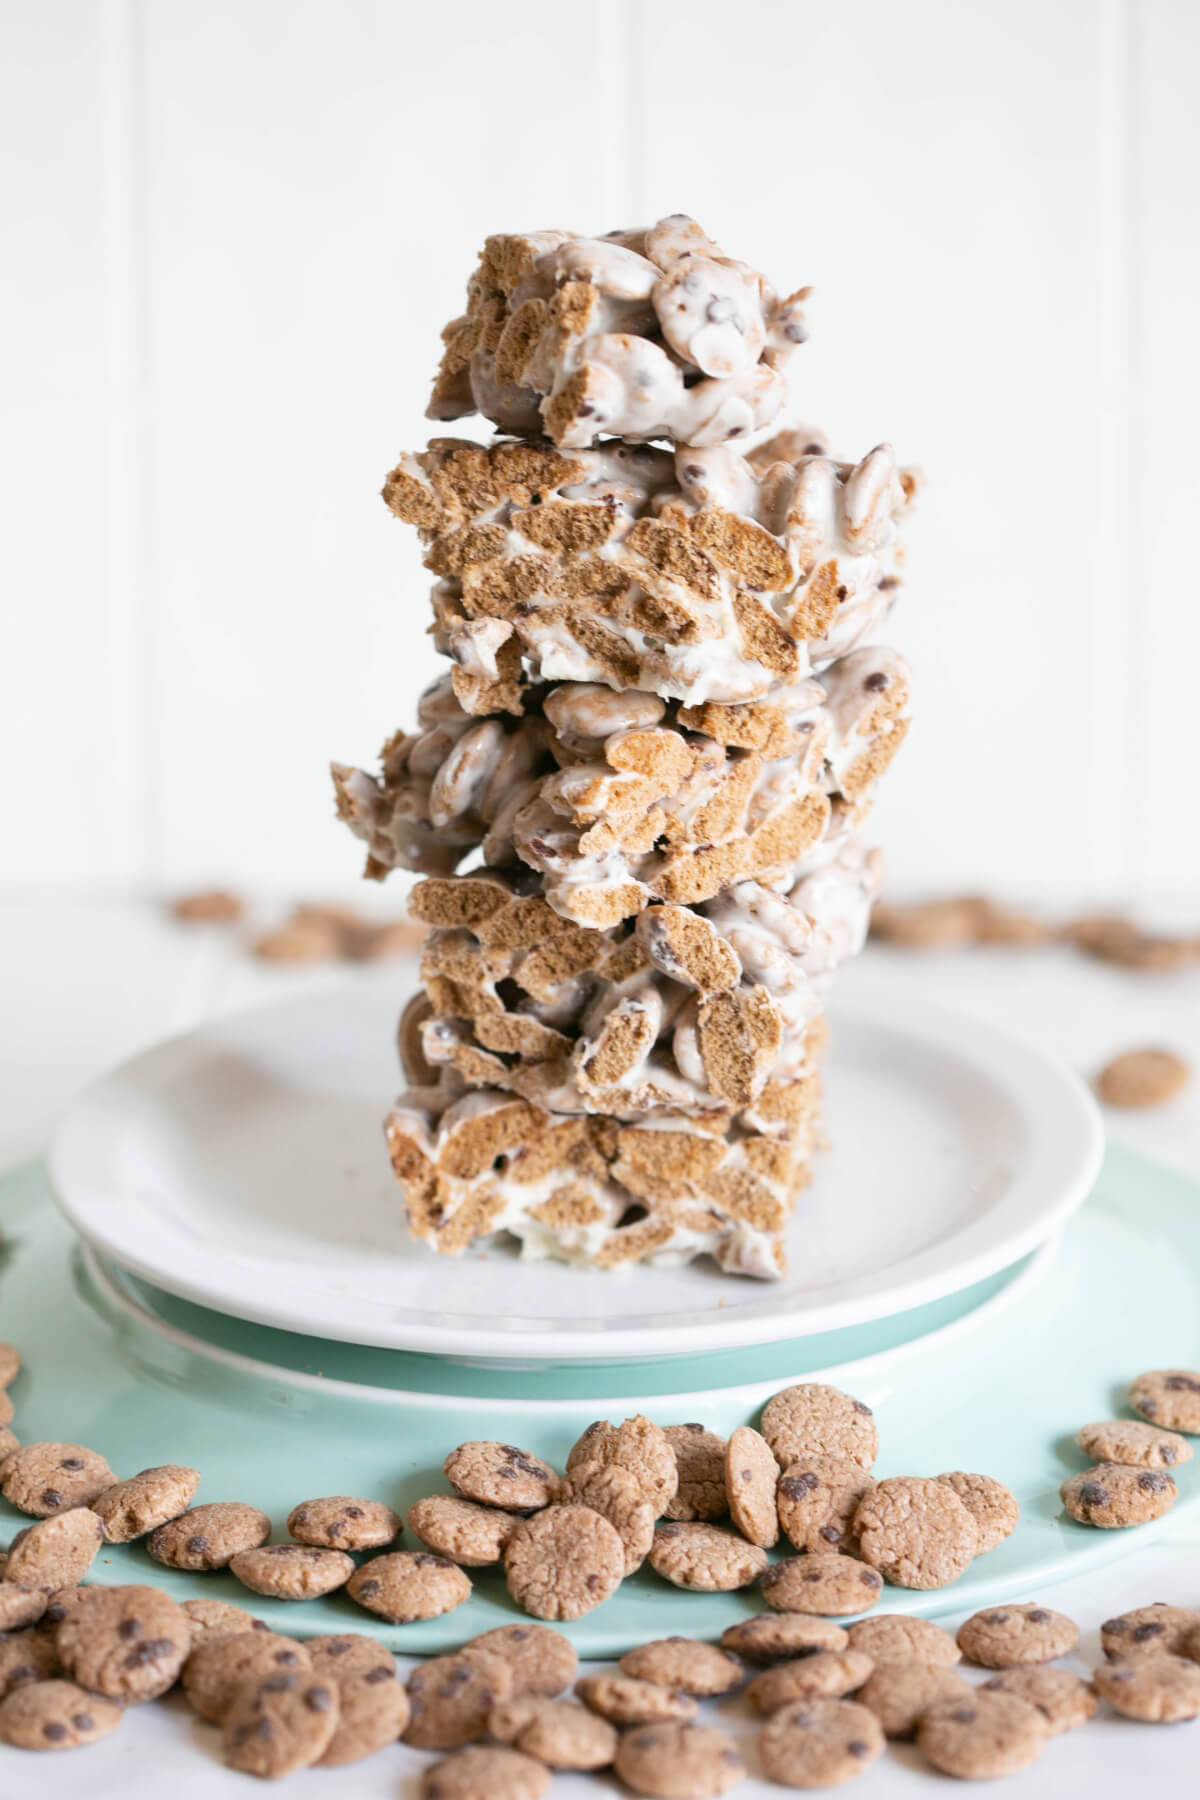 marshmallow treats with cookie crisp cereal